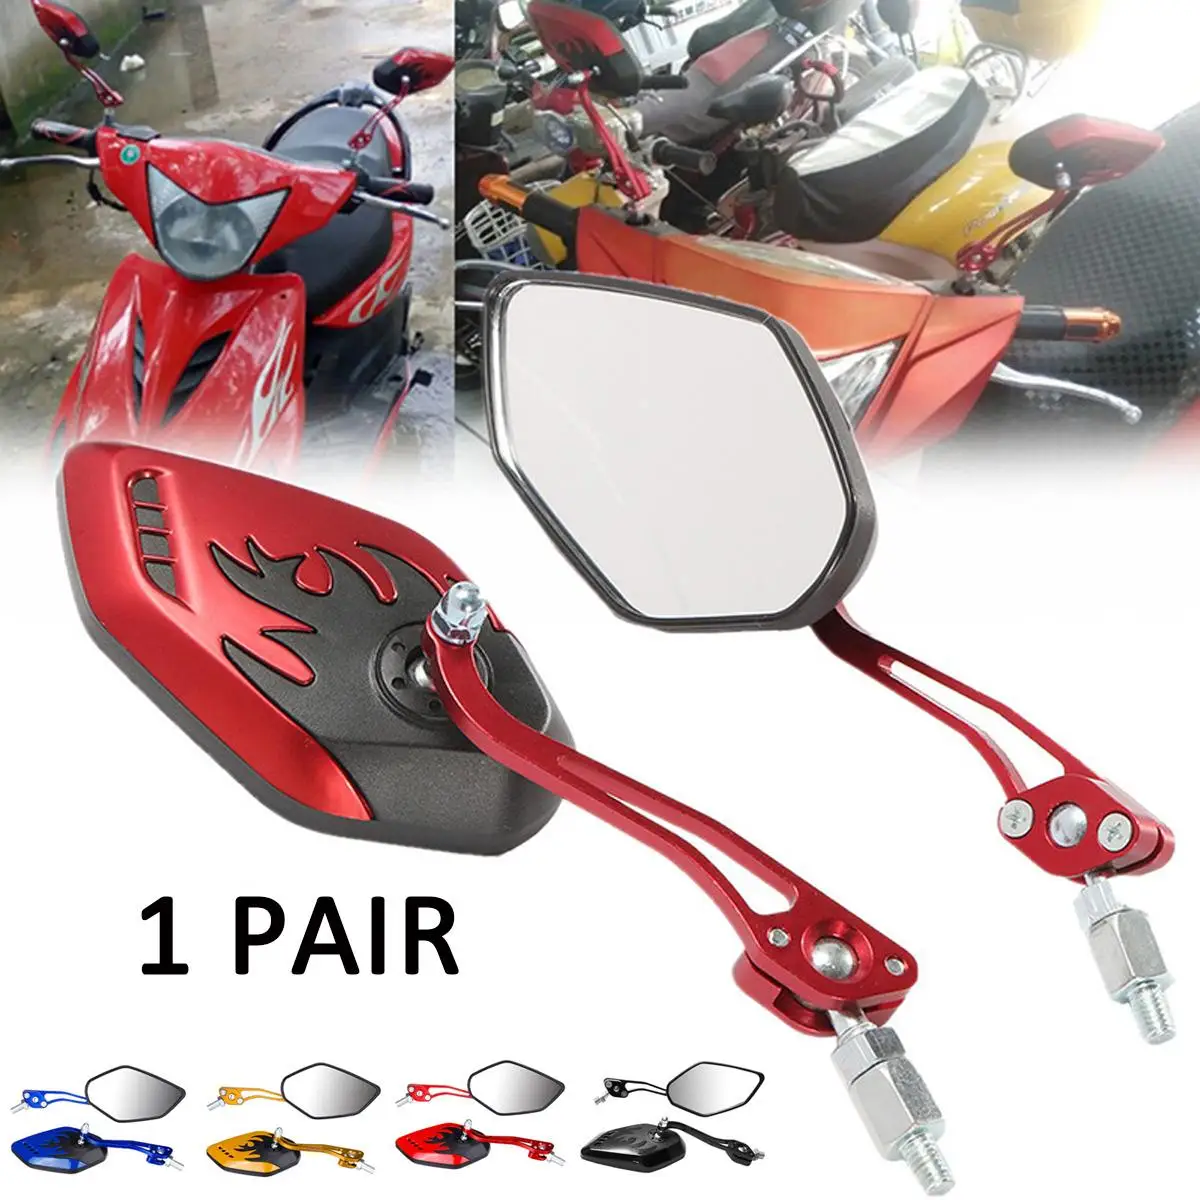 

2PCS/Pair Universal Motorcycle Rearview Mirror 360 Degree Rotation Side Rearview Mirrors Scooter Motocross Sided Convex Mirror